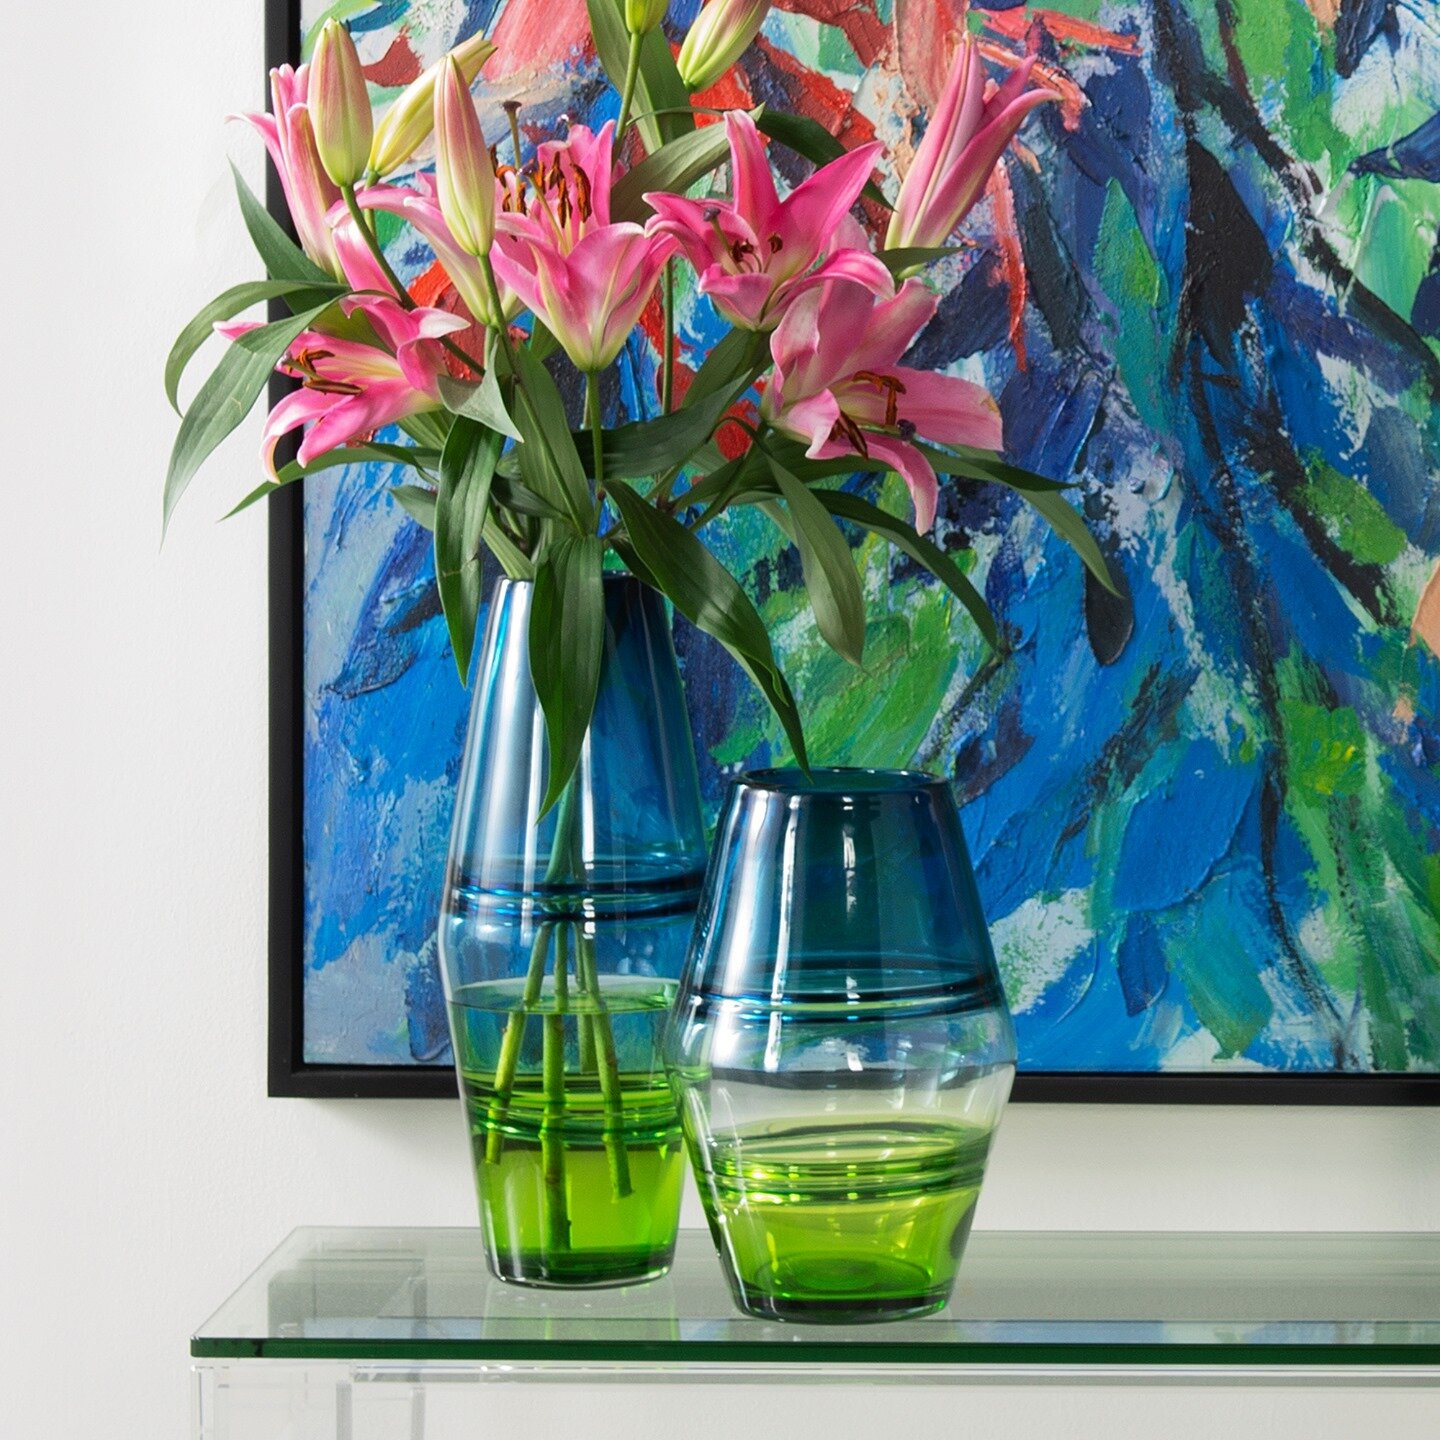 Live in Color!

It seems like such a simple thing, but ever notice the feeling you get when you enter a room with fresh flowers, or pops of color in the decor?

If you love color, this is the vase for you! The transparent coloring allows for the ligh